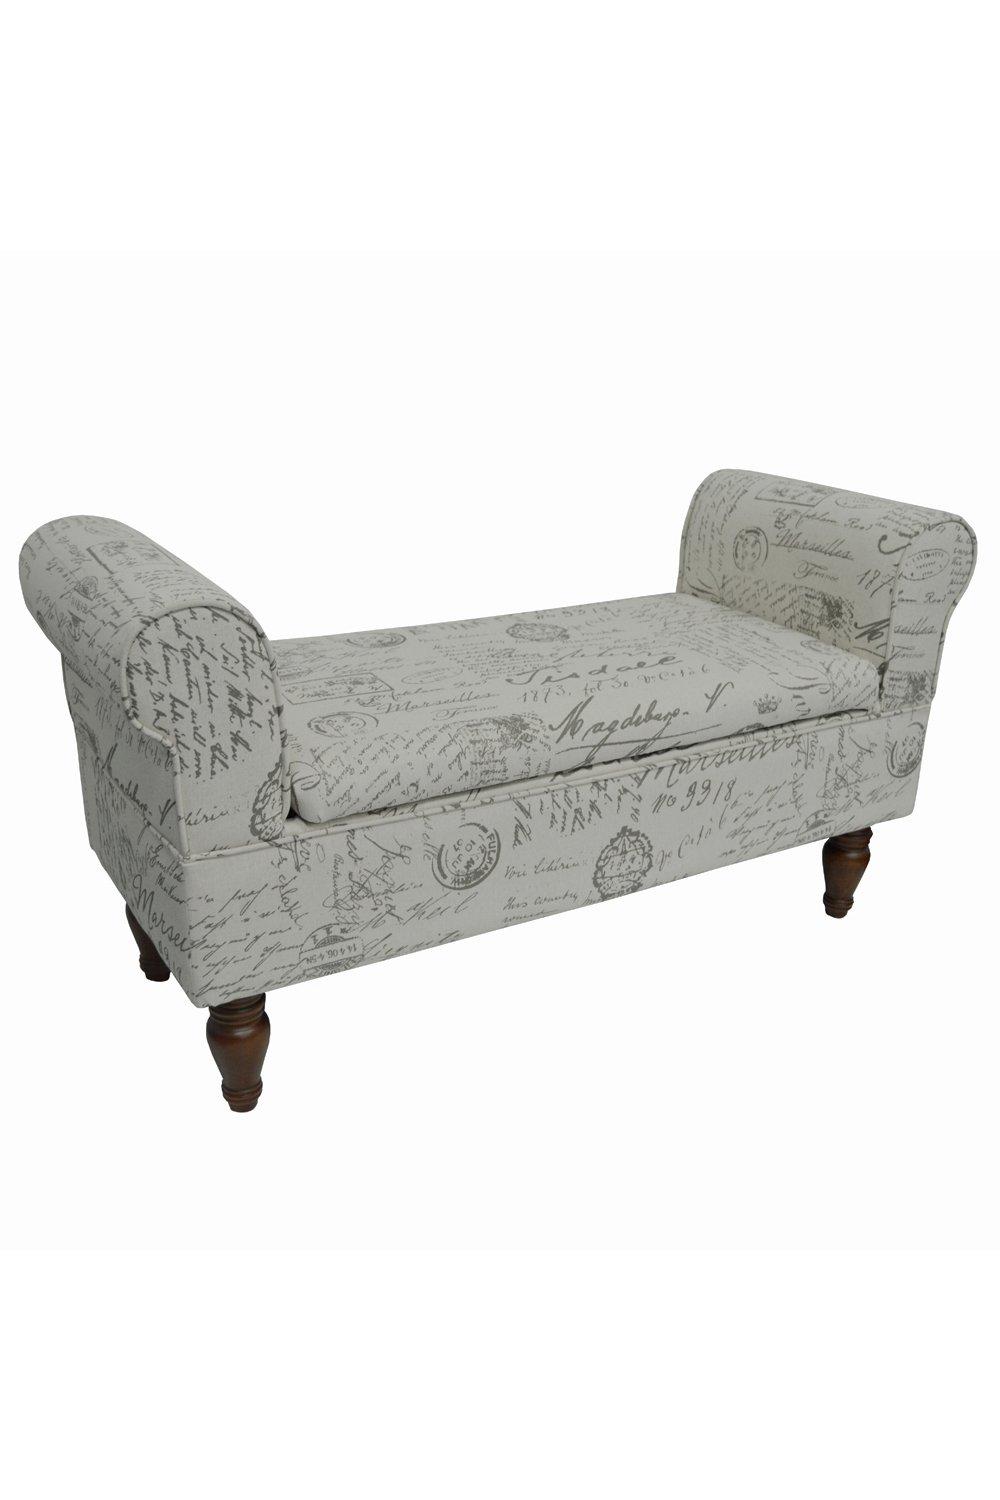 Storage Ottoman Bench  Padded Seat With Retro French Print And Wood Legs - Cream  Brown